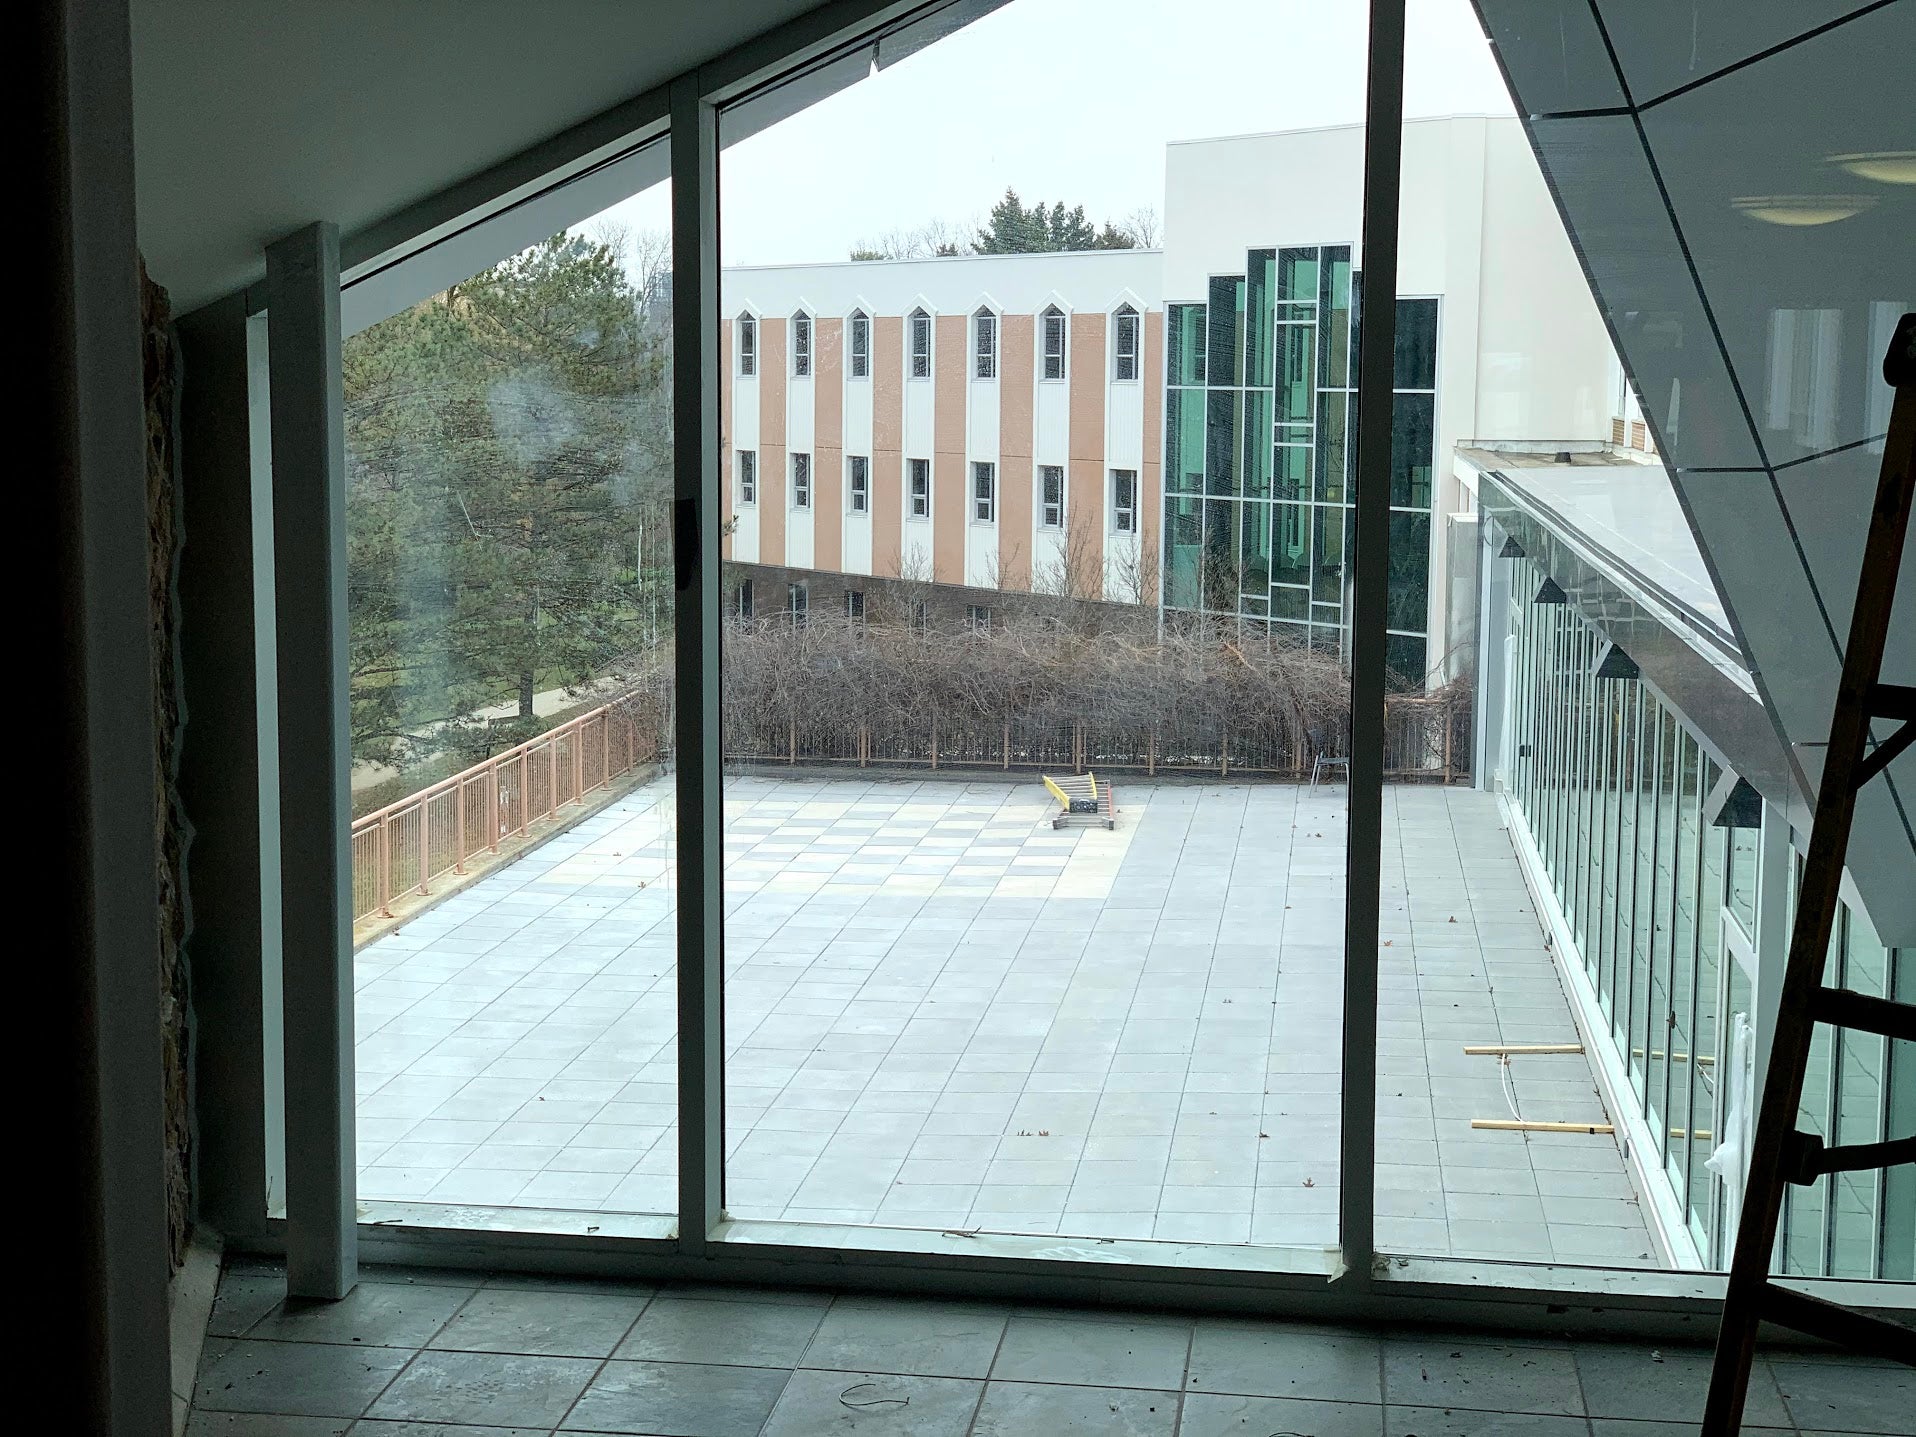 view of the new patio stones, including a chess board layout in the far corner. 